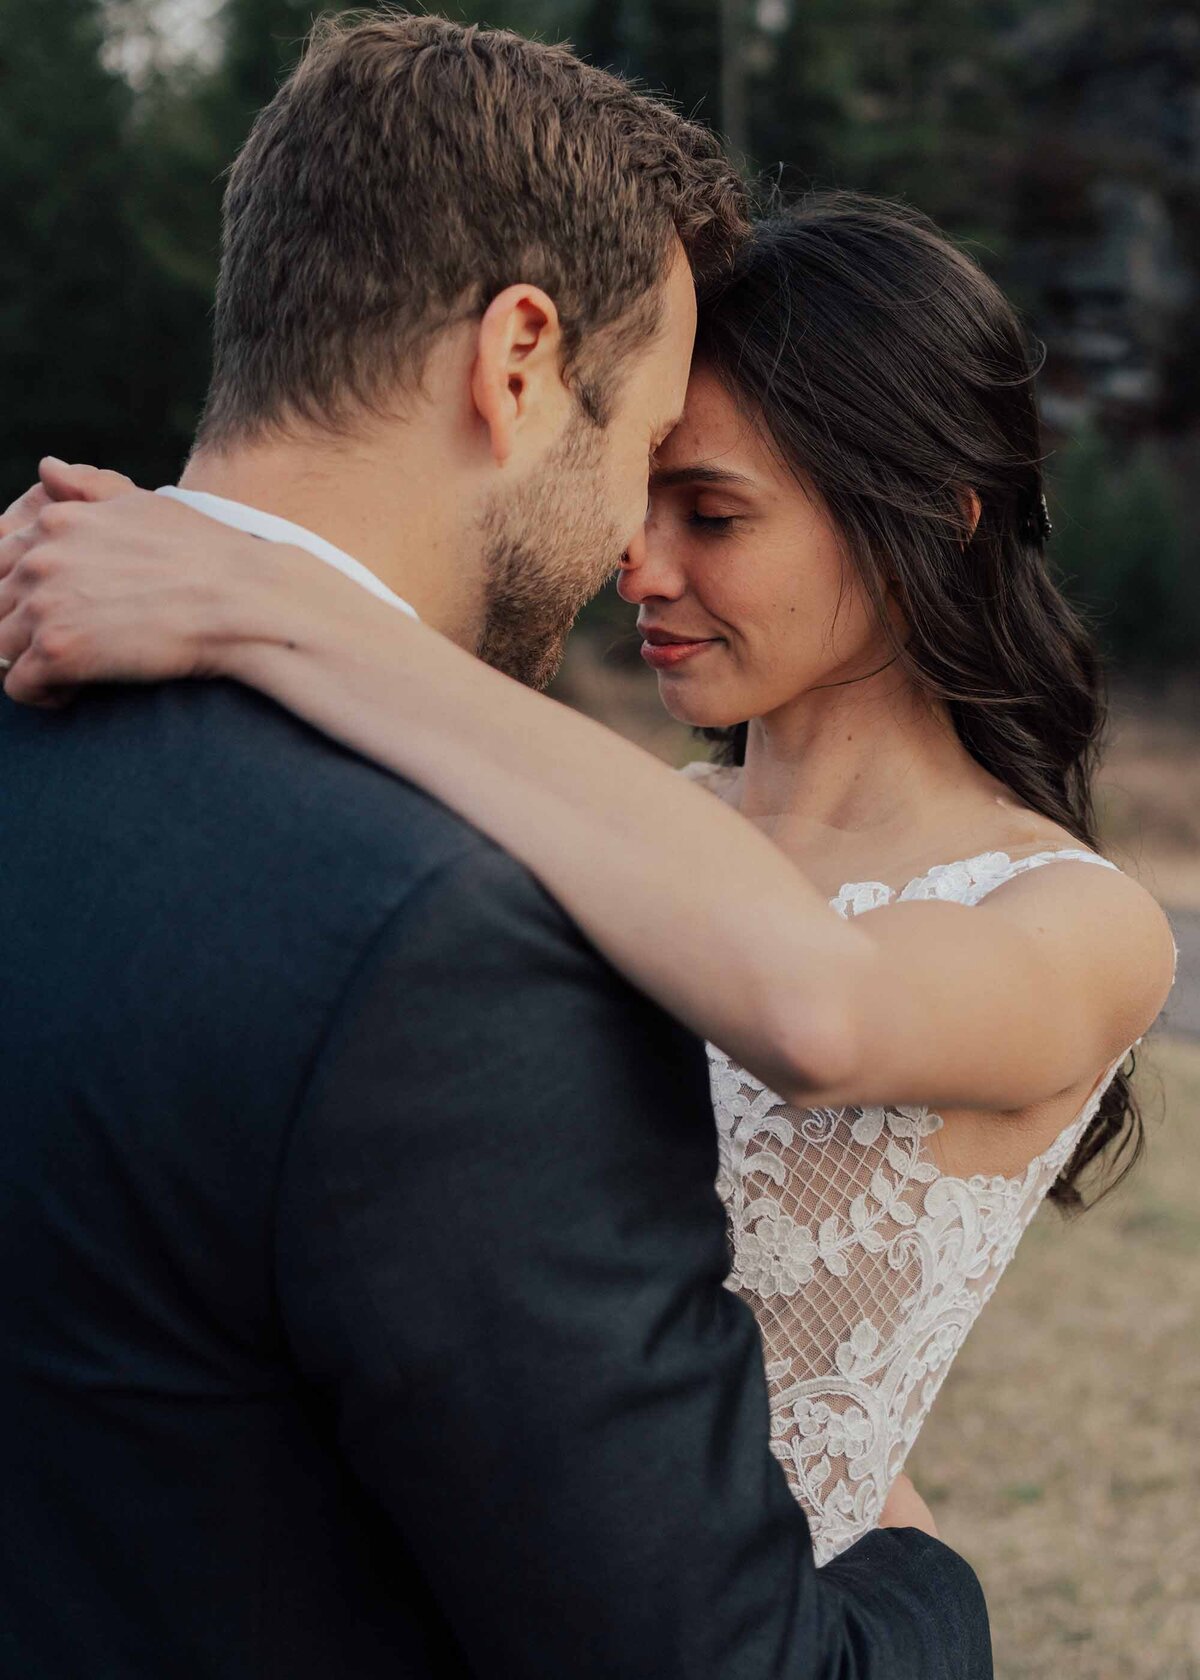 Maddie Rae Photography bride and groom standing face to face touching foreheads. she has her arms around his neck and his arms are around her waist. taken from behind the groom